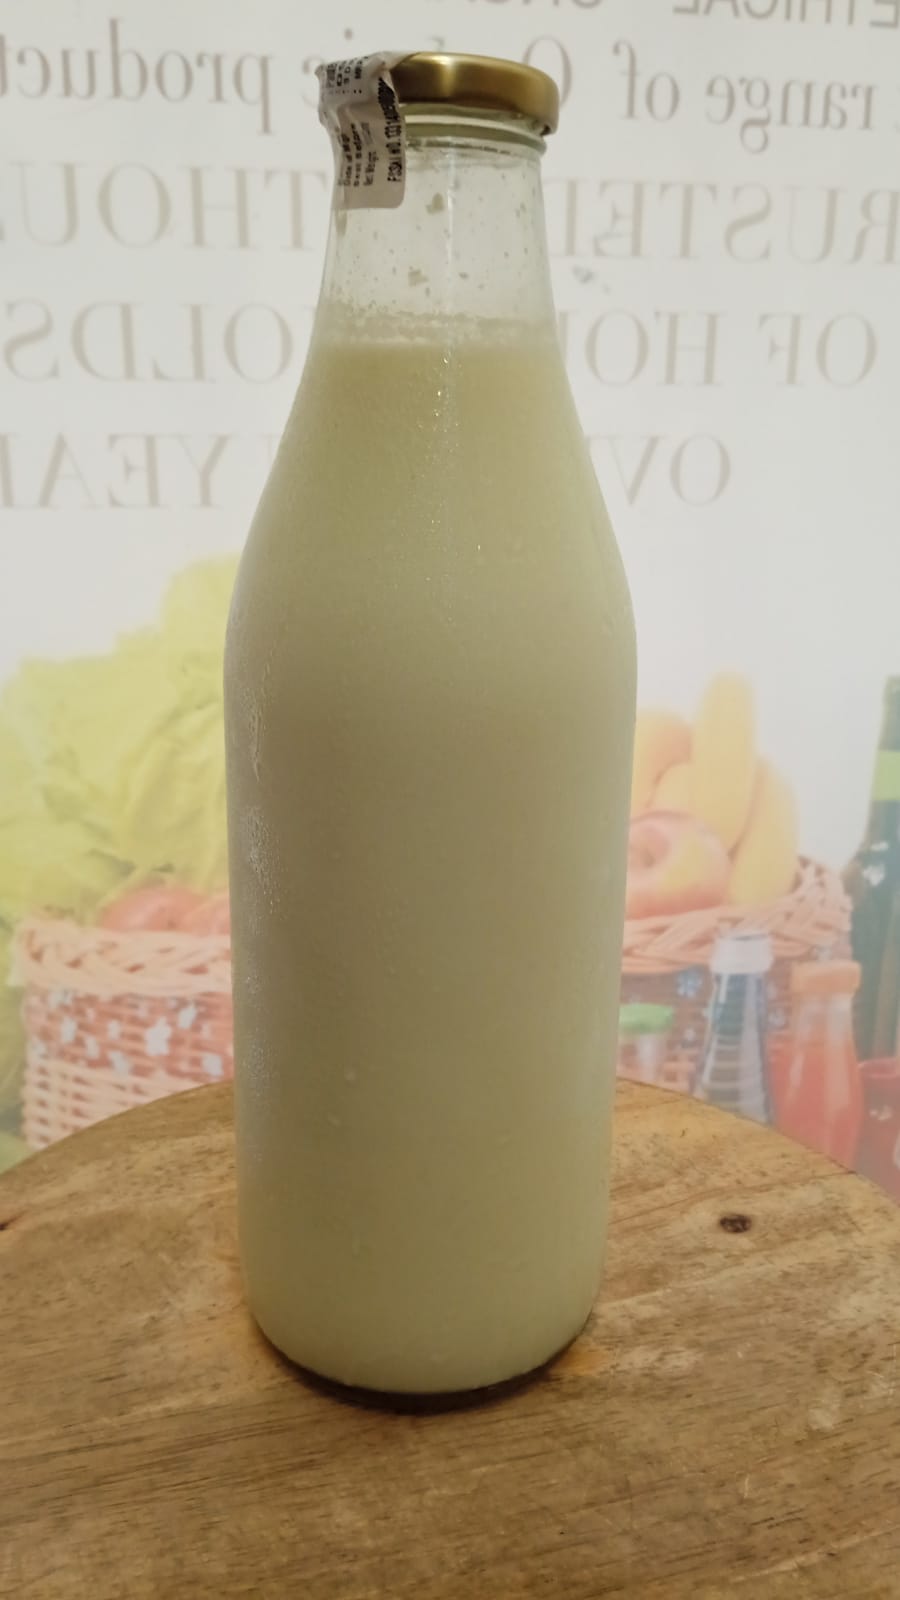 COW'S MILK - A2 - HIMALAYAN - PASTEURIZED